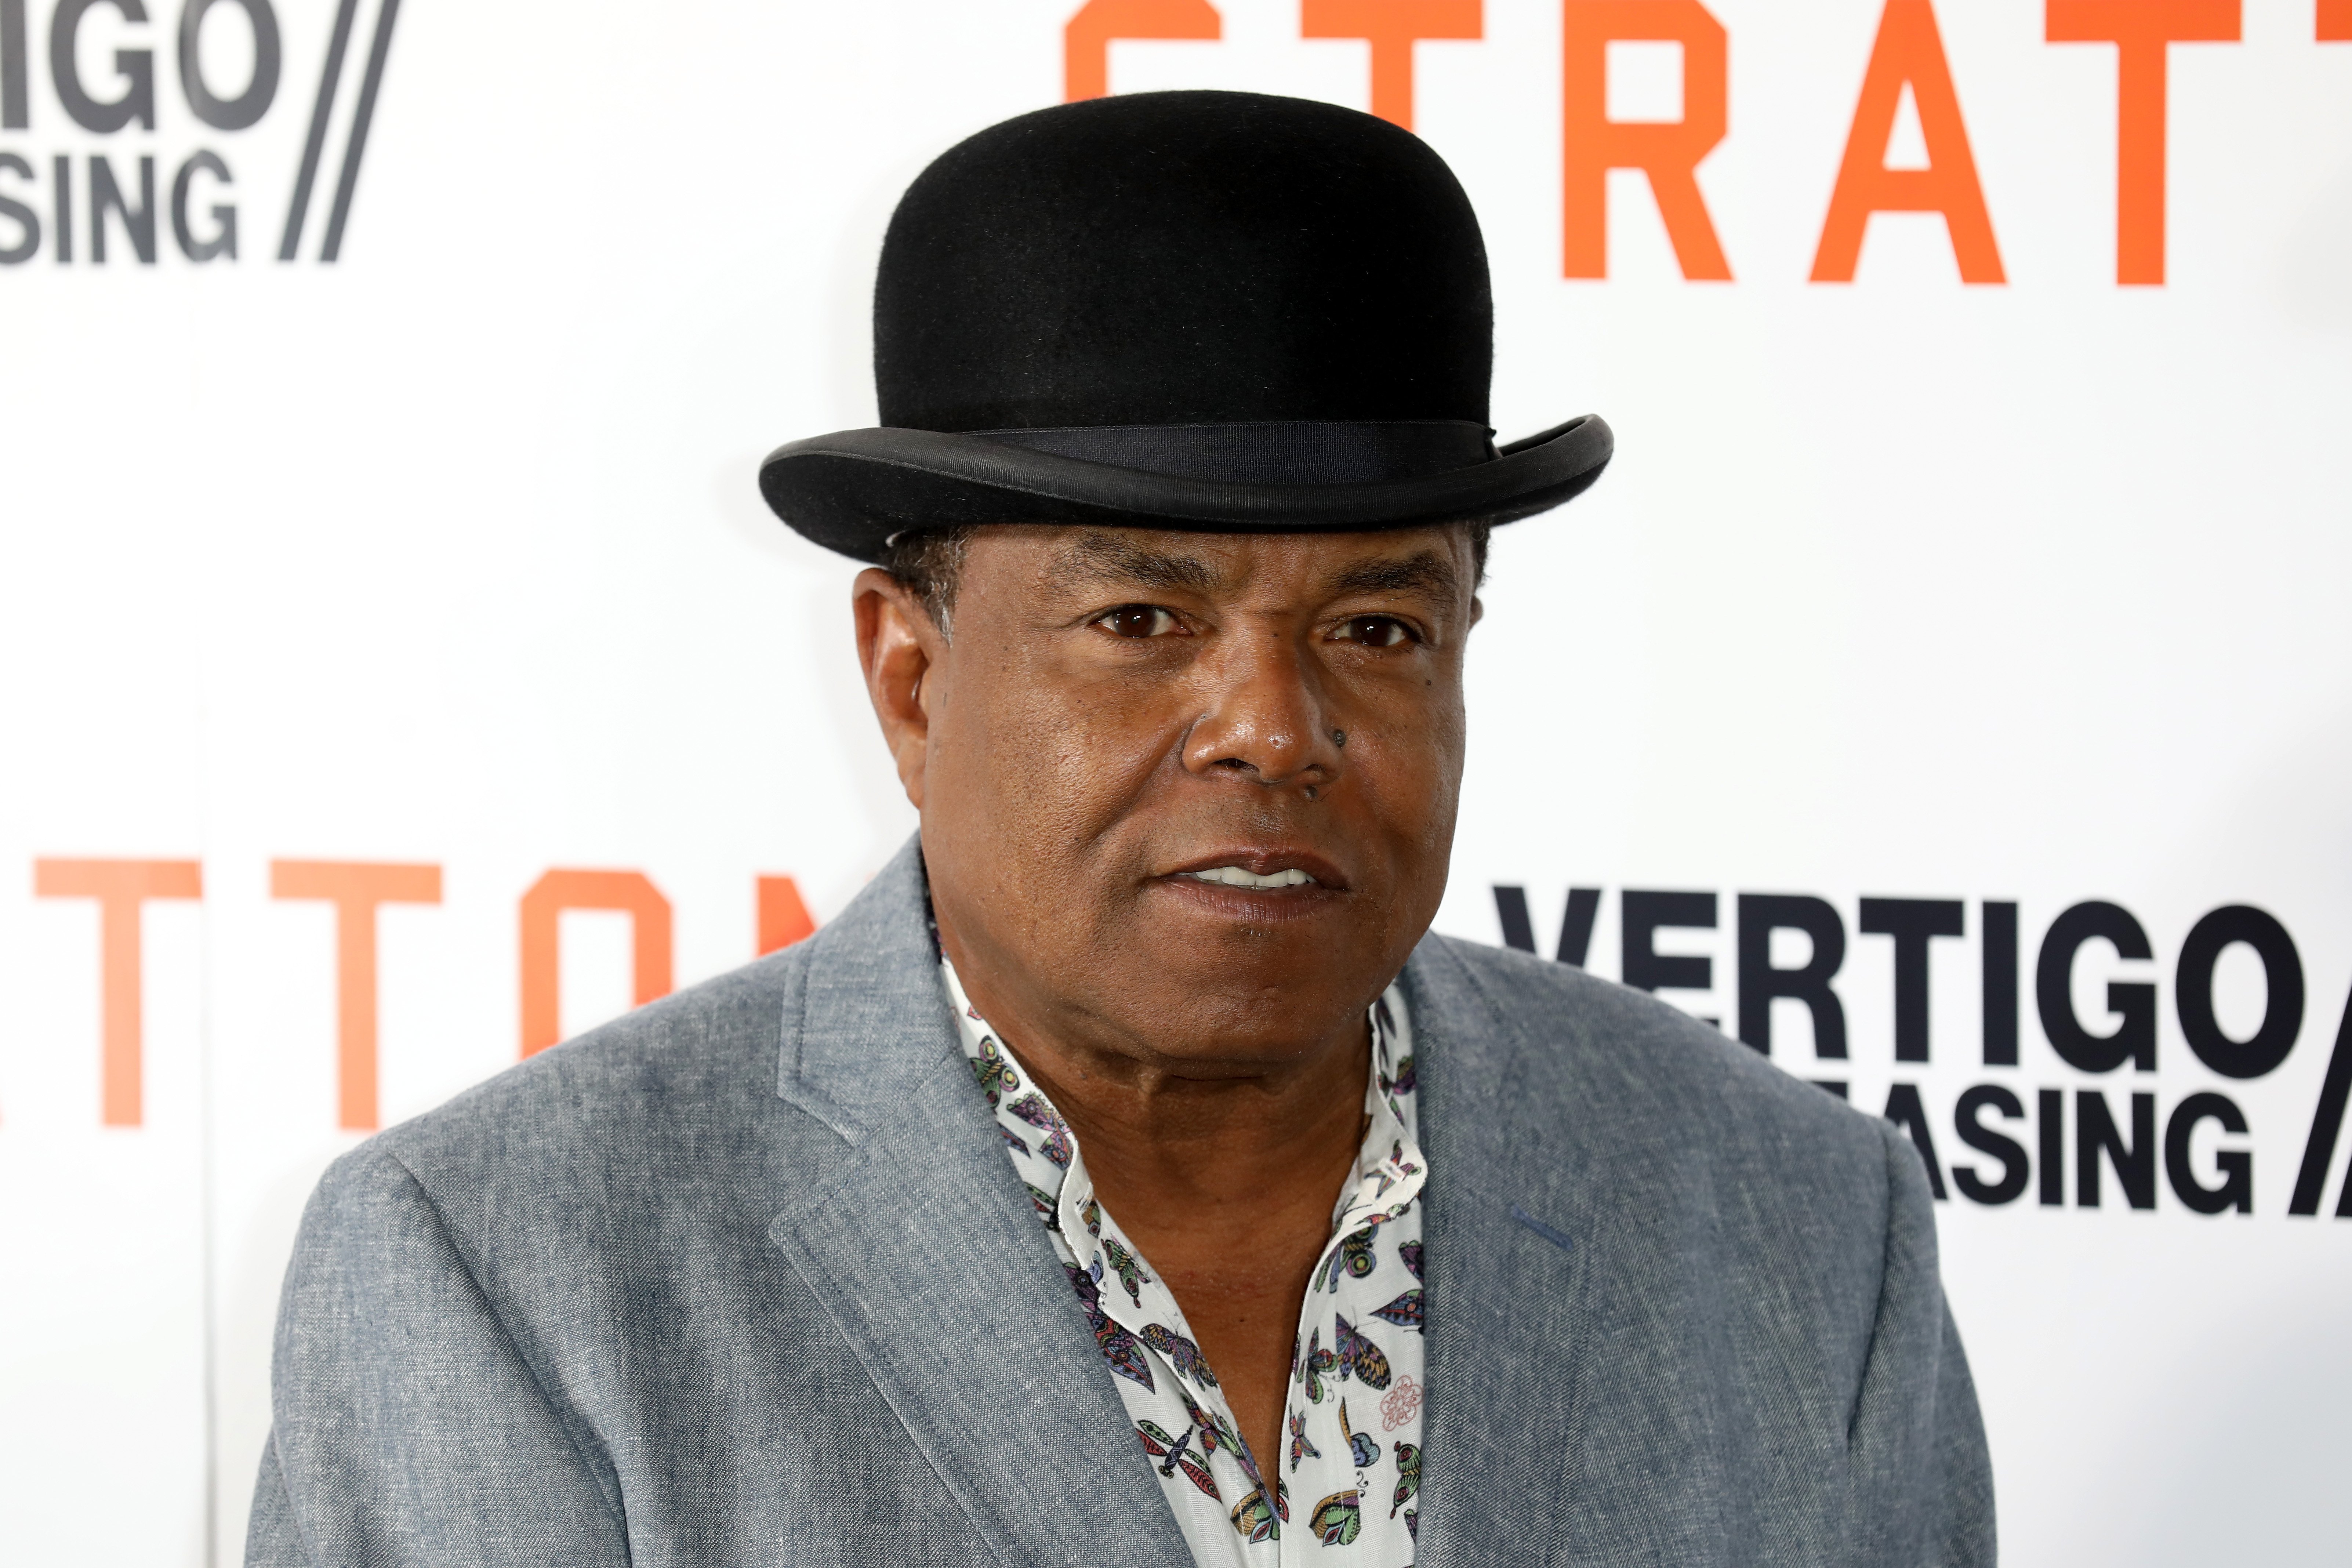 Tito Jackson, Michael Jackson's older brother attending a premiere in London in 2017. | Photo: Getty Images